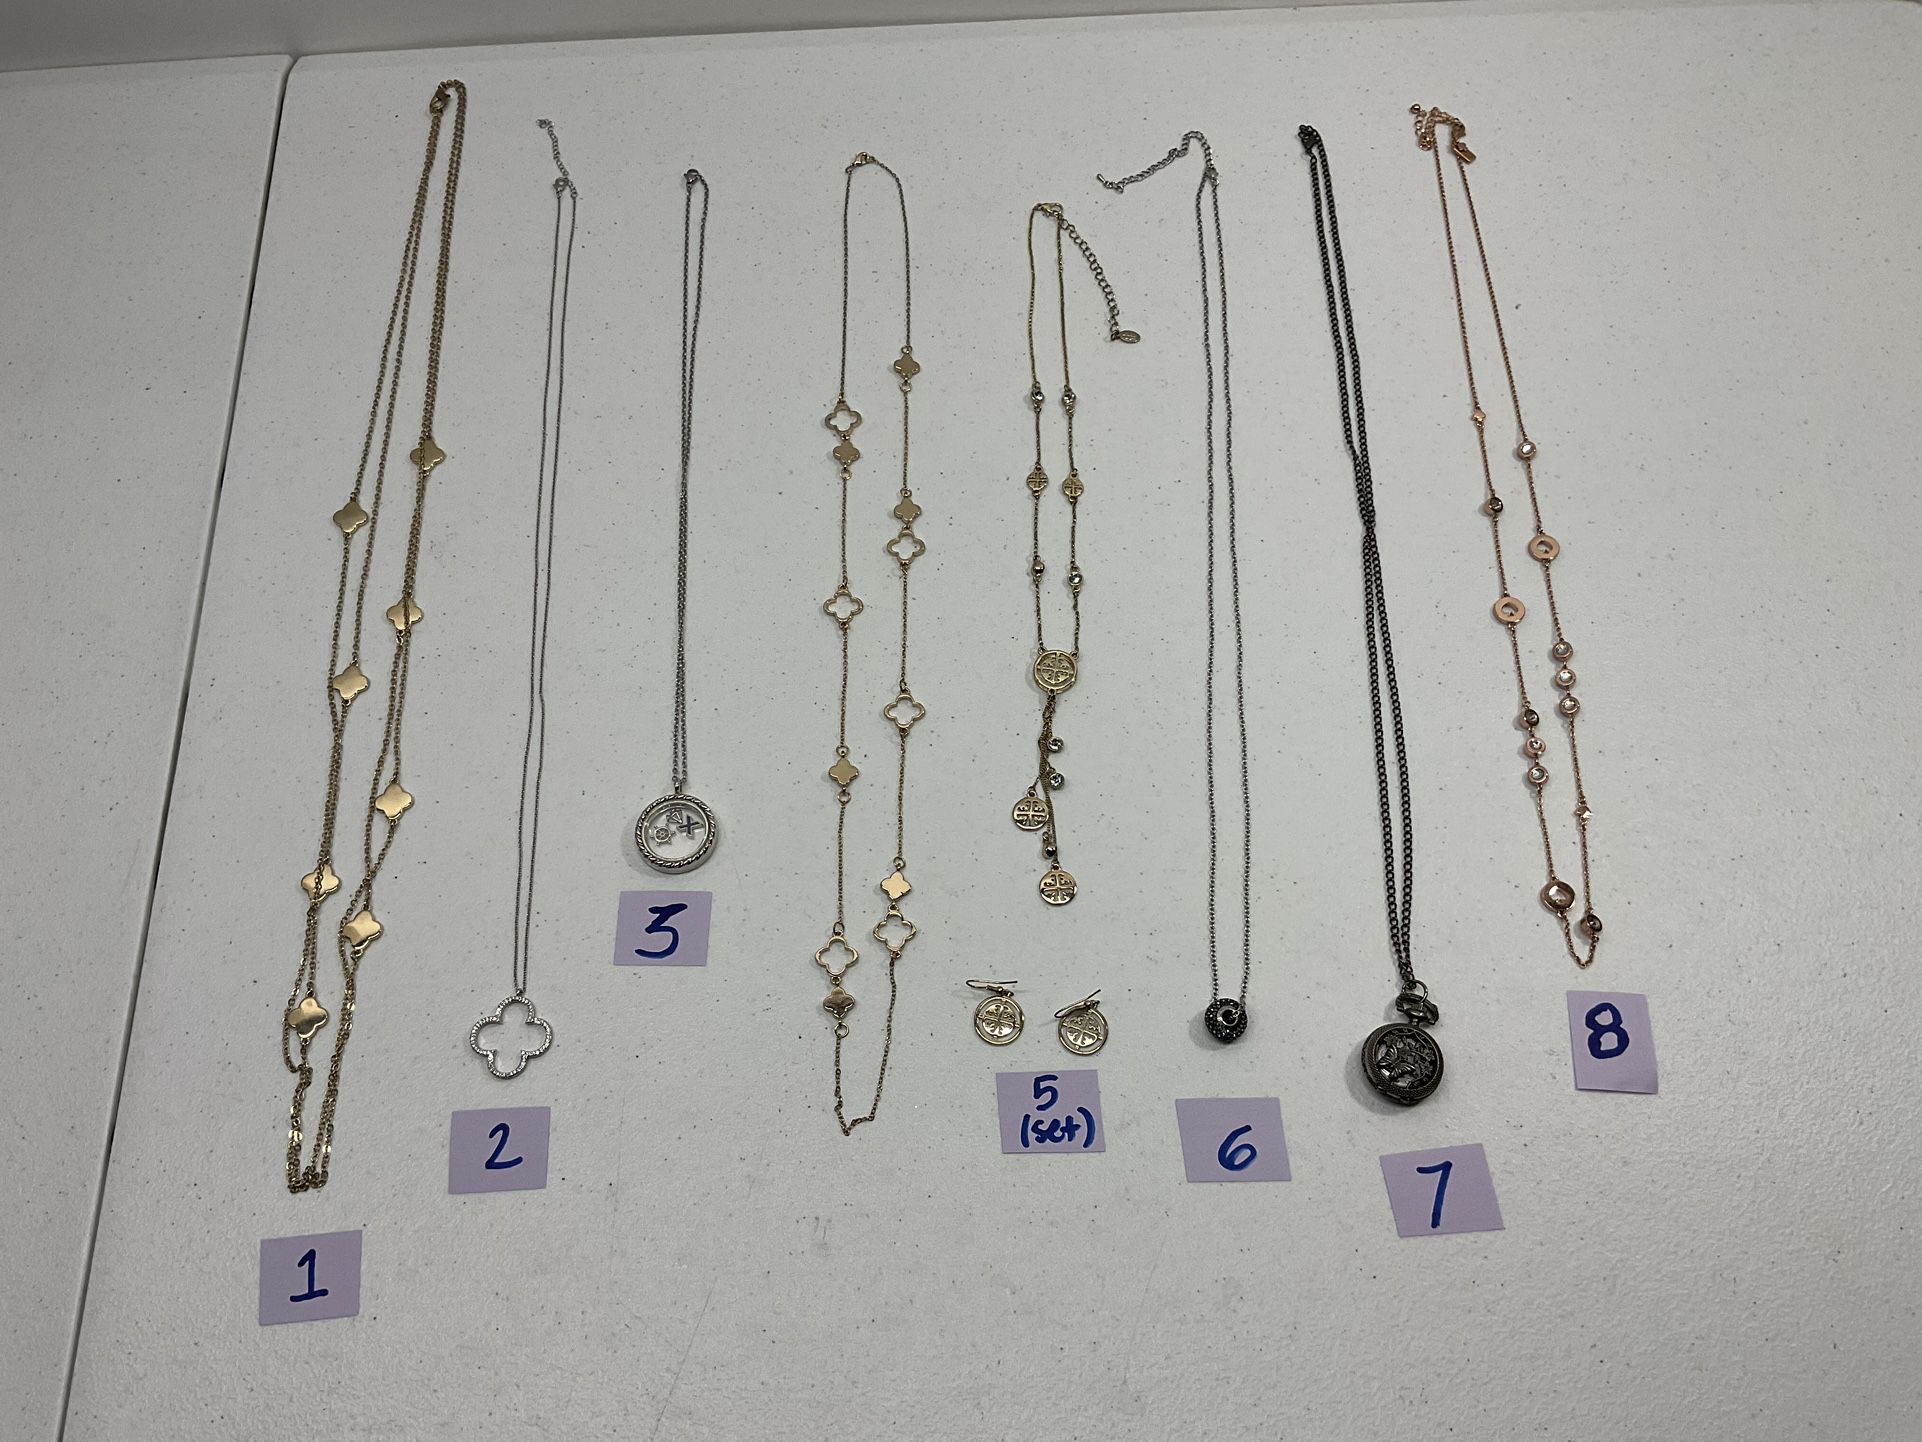 Gorgeous Necklaces - Kate Spade, Tory Burch, Pandora And More! See Pricing In Description.